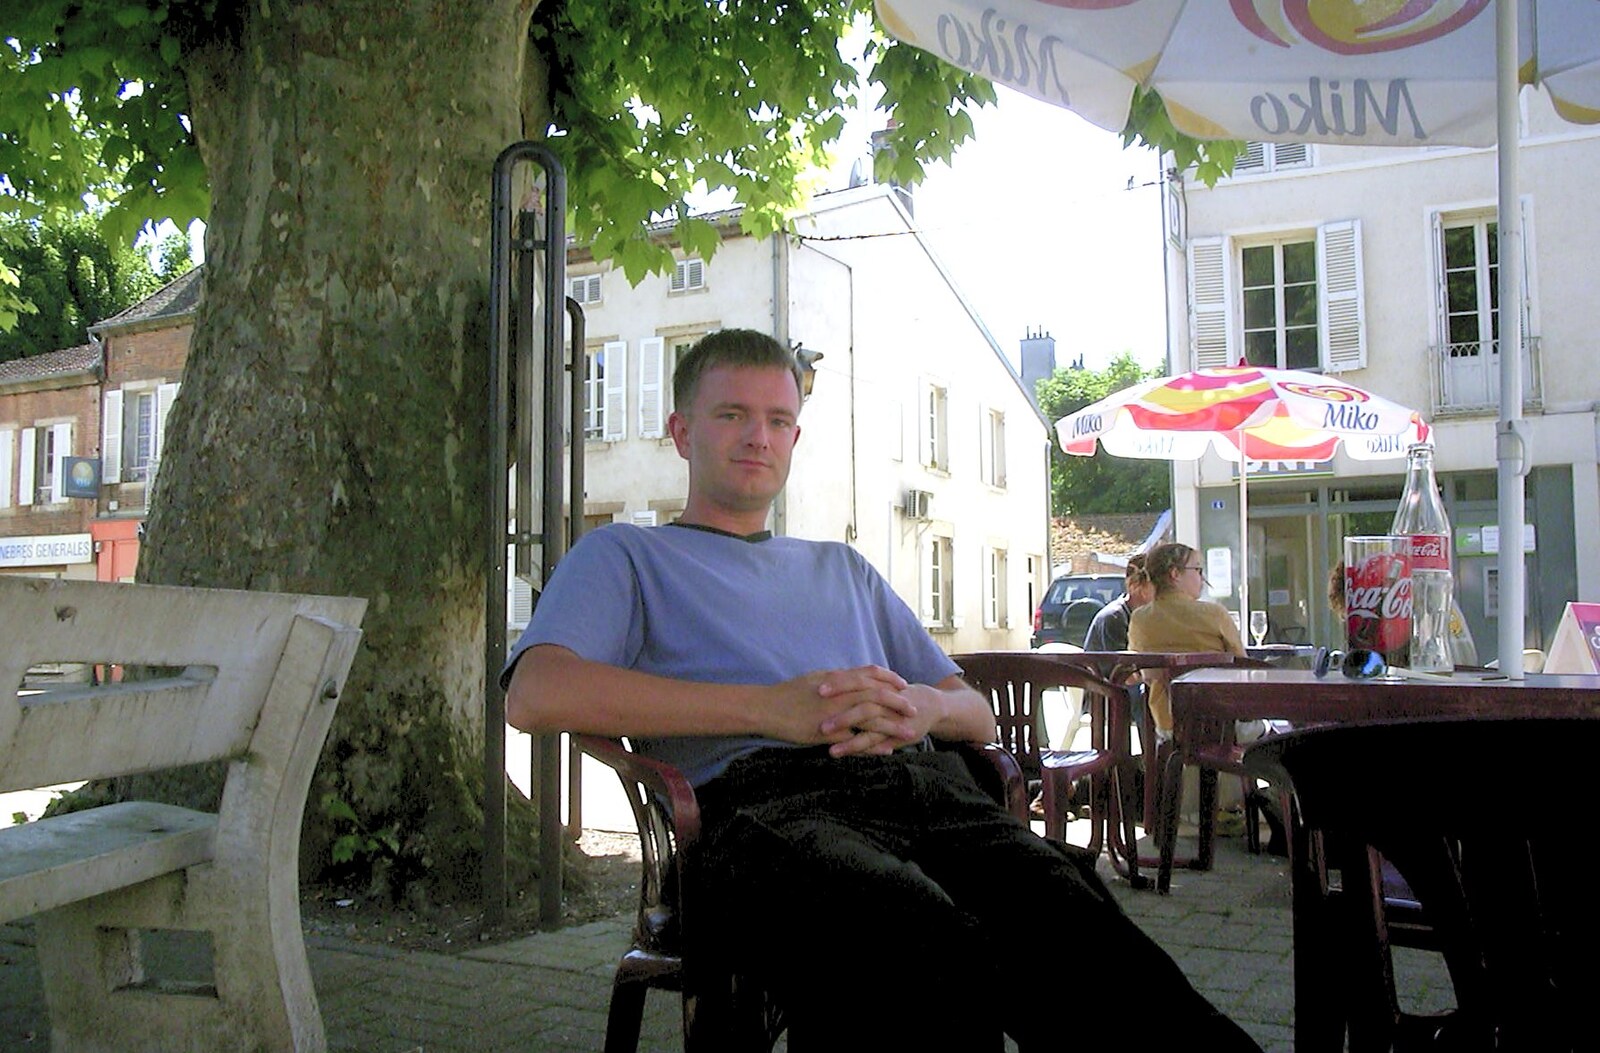 Nosher sits back from A Short Holiday in Chivres, Burgundy, France - 21st July 2001